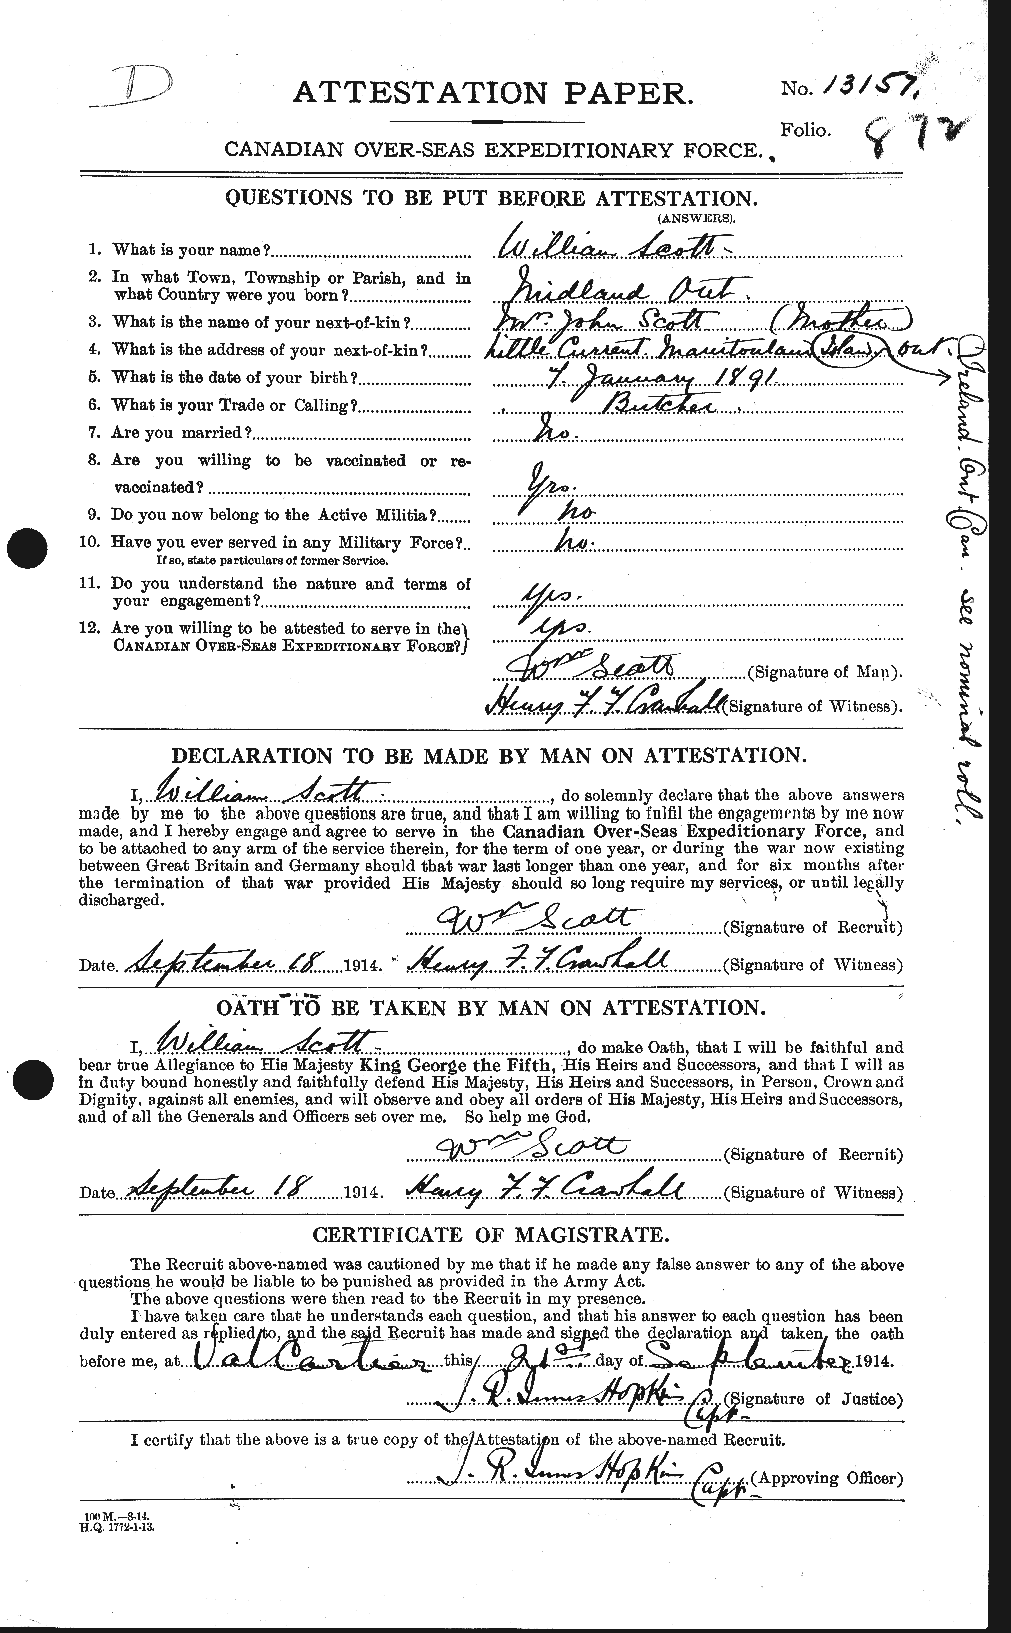 Personnel Records of the First World War - CEF 087659a